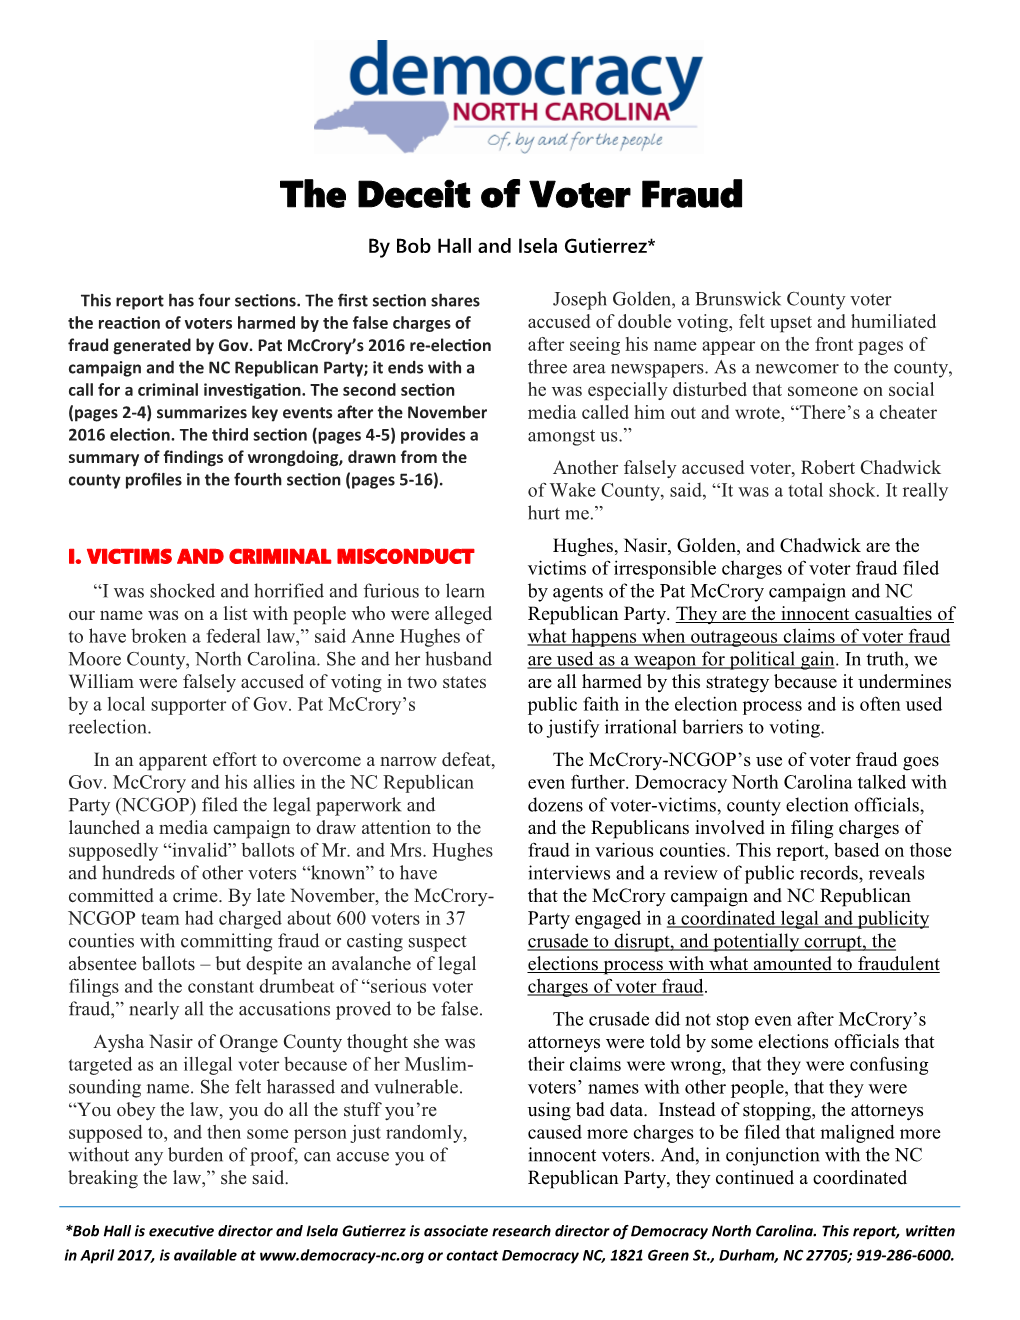 The Deceit of Voter Fraud